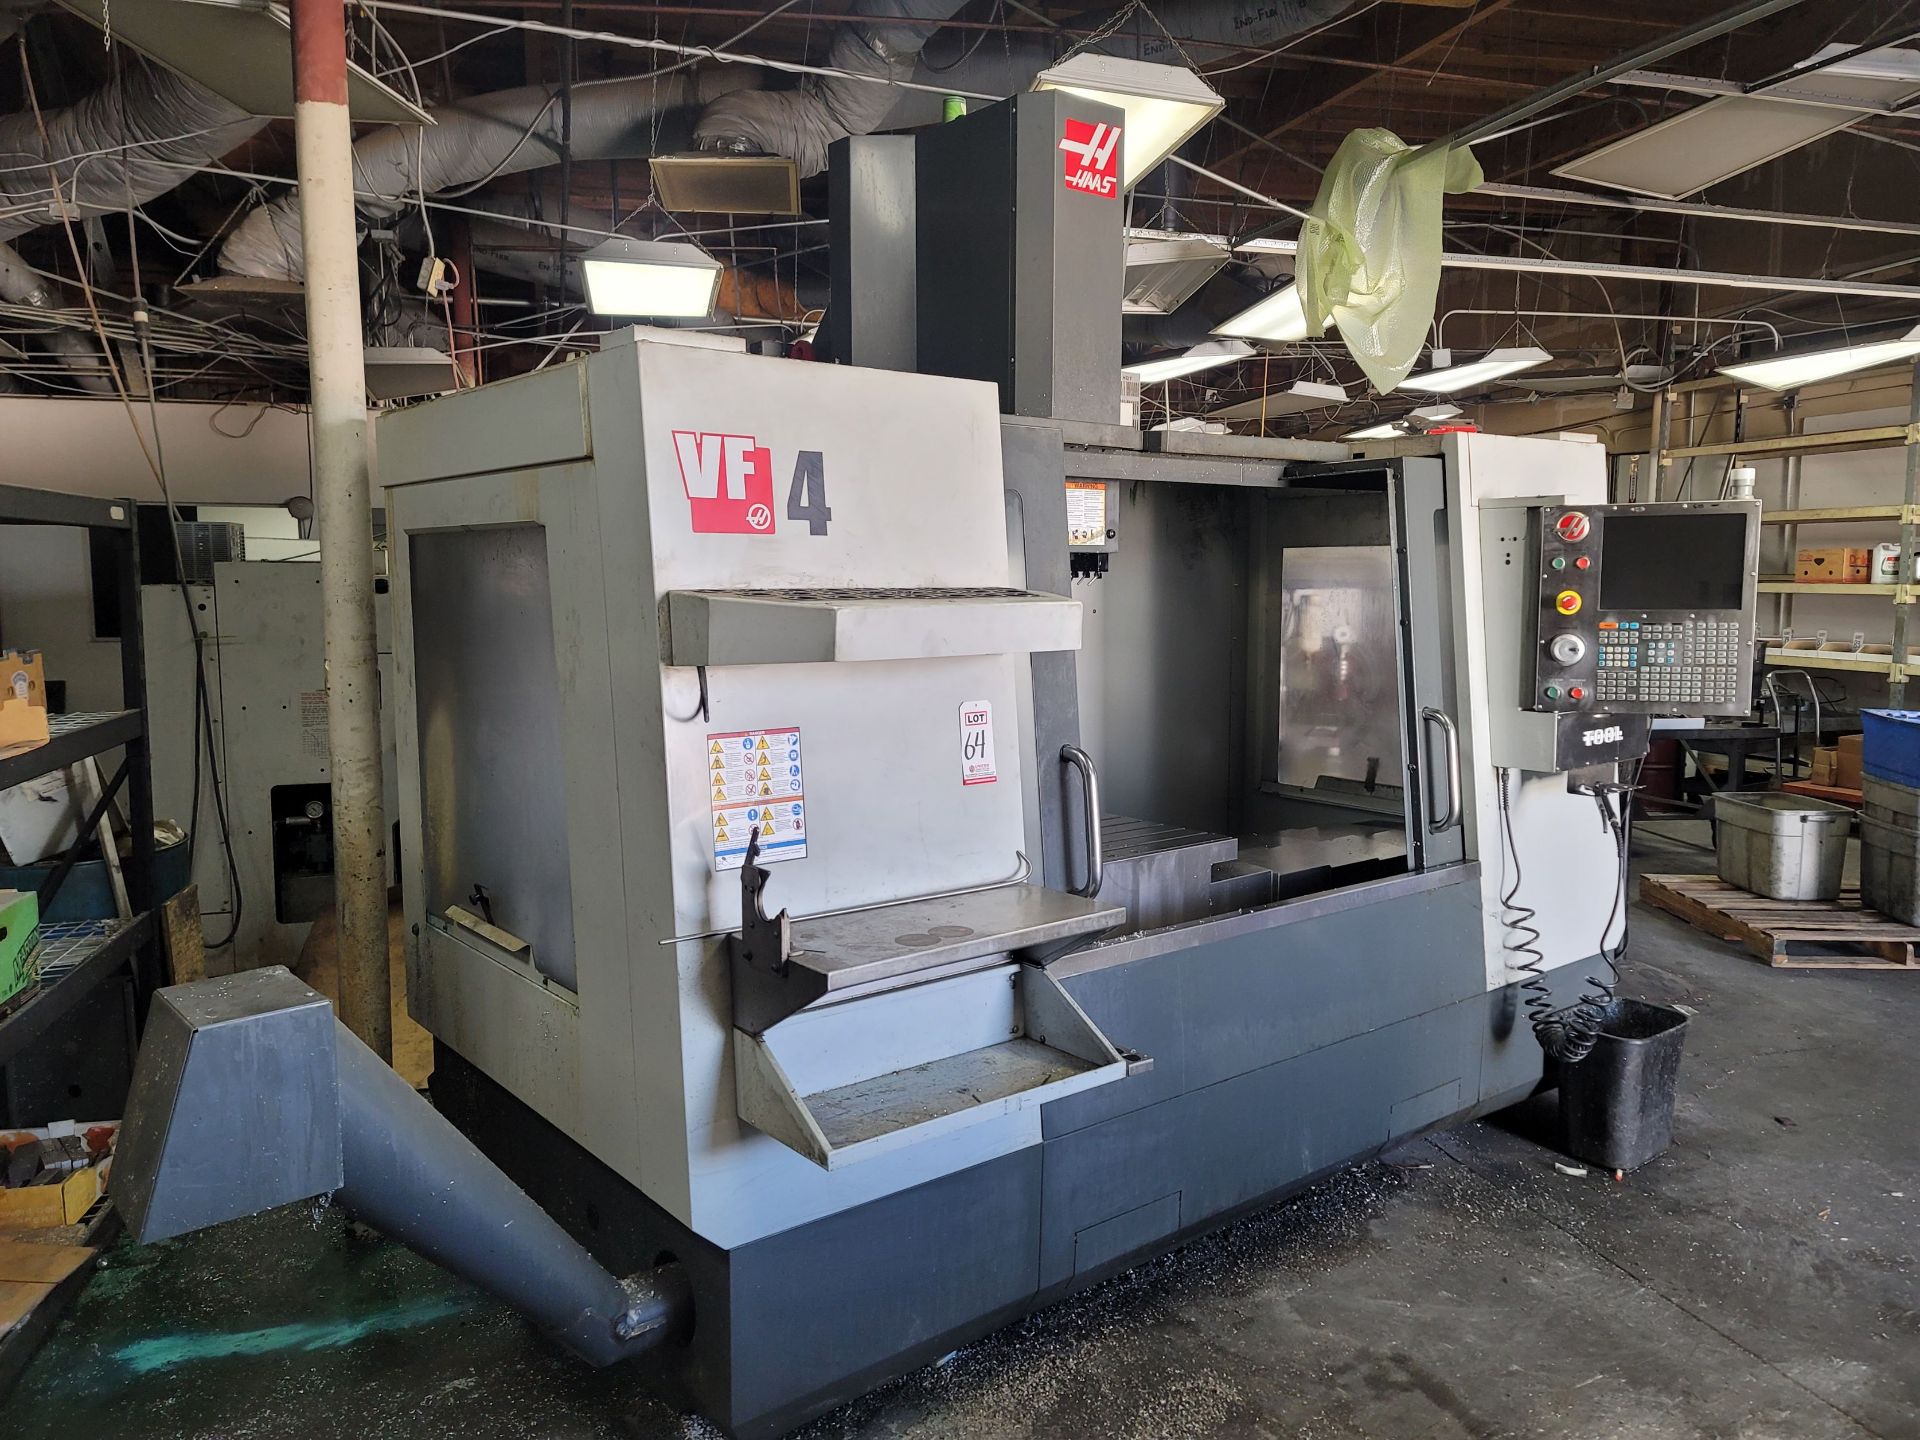 2013 HAAS VF-4 VERTICAL MACHINING CENTER, XYZ TRAVELS: 50" X 20" X 25", 52" X 18" TABLE, 24 ATC, - Image 2 of 8